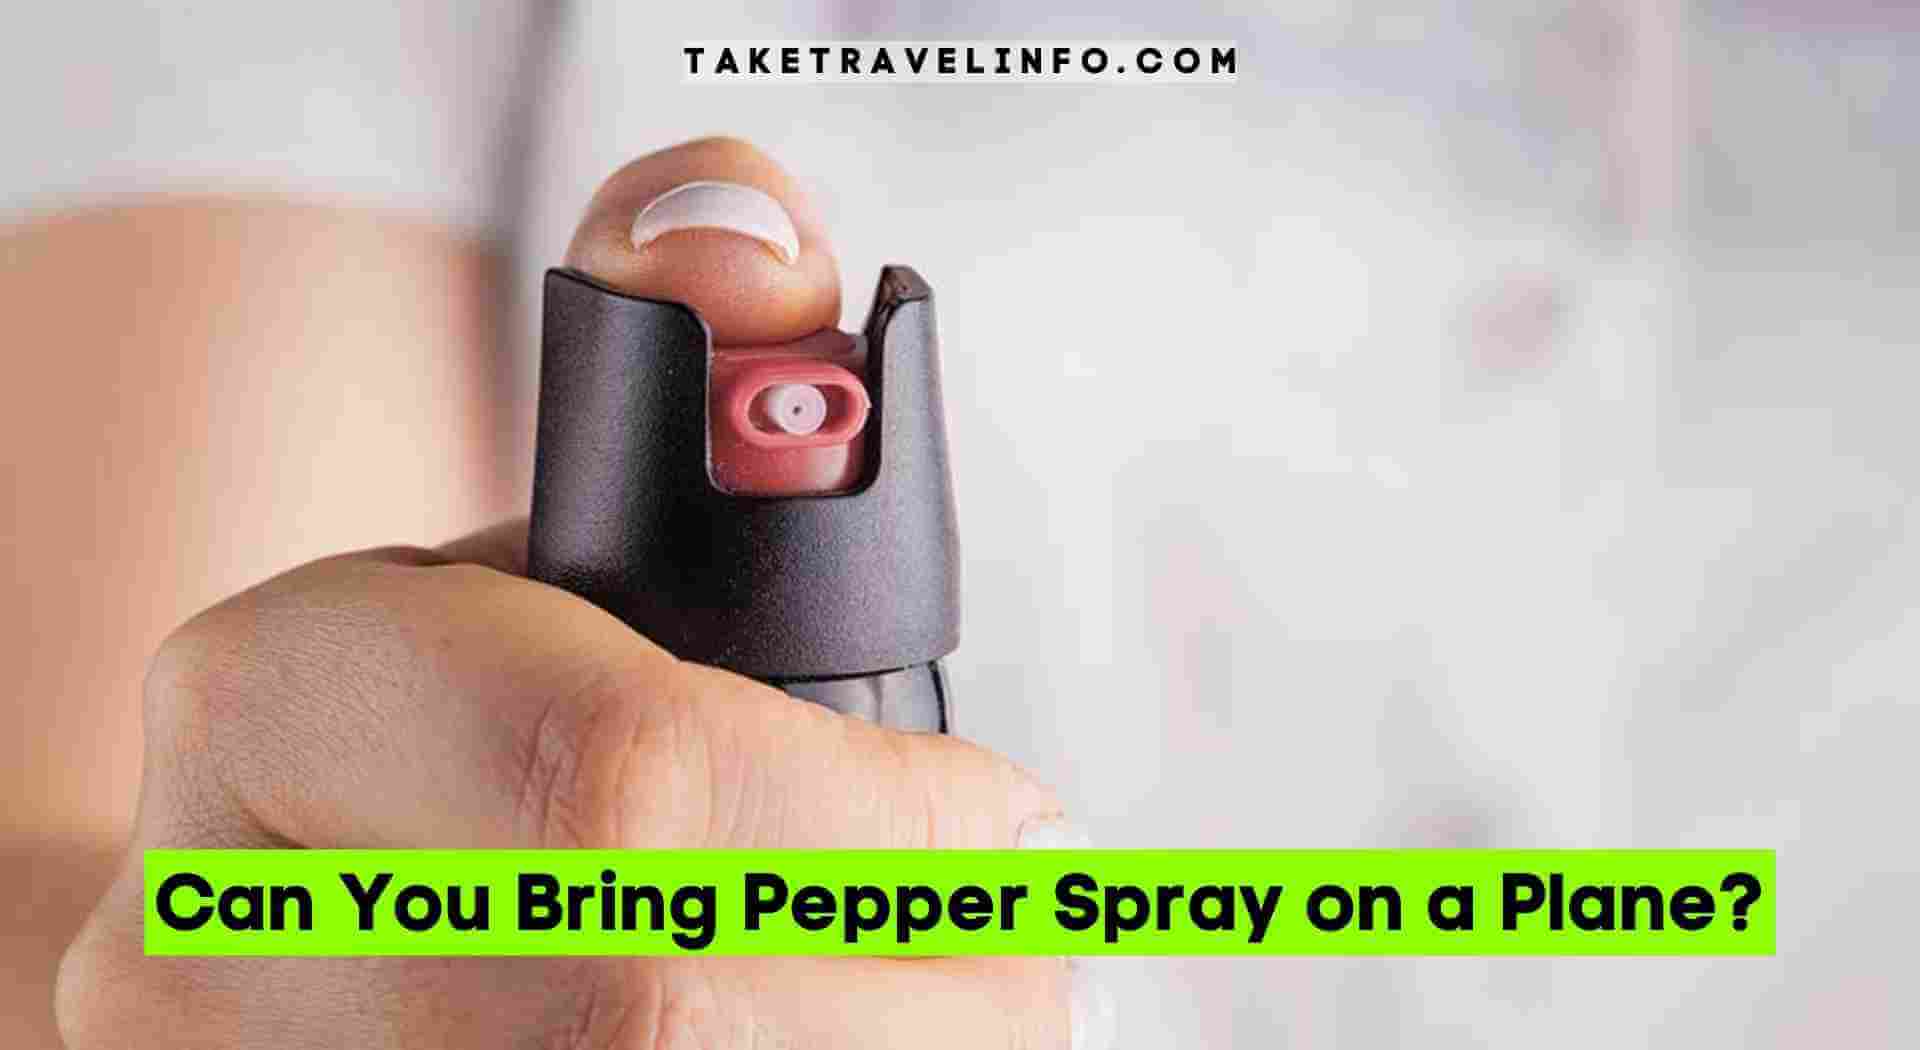 Can You Bring Pepper Spray on a Plane?